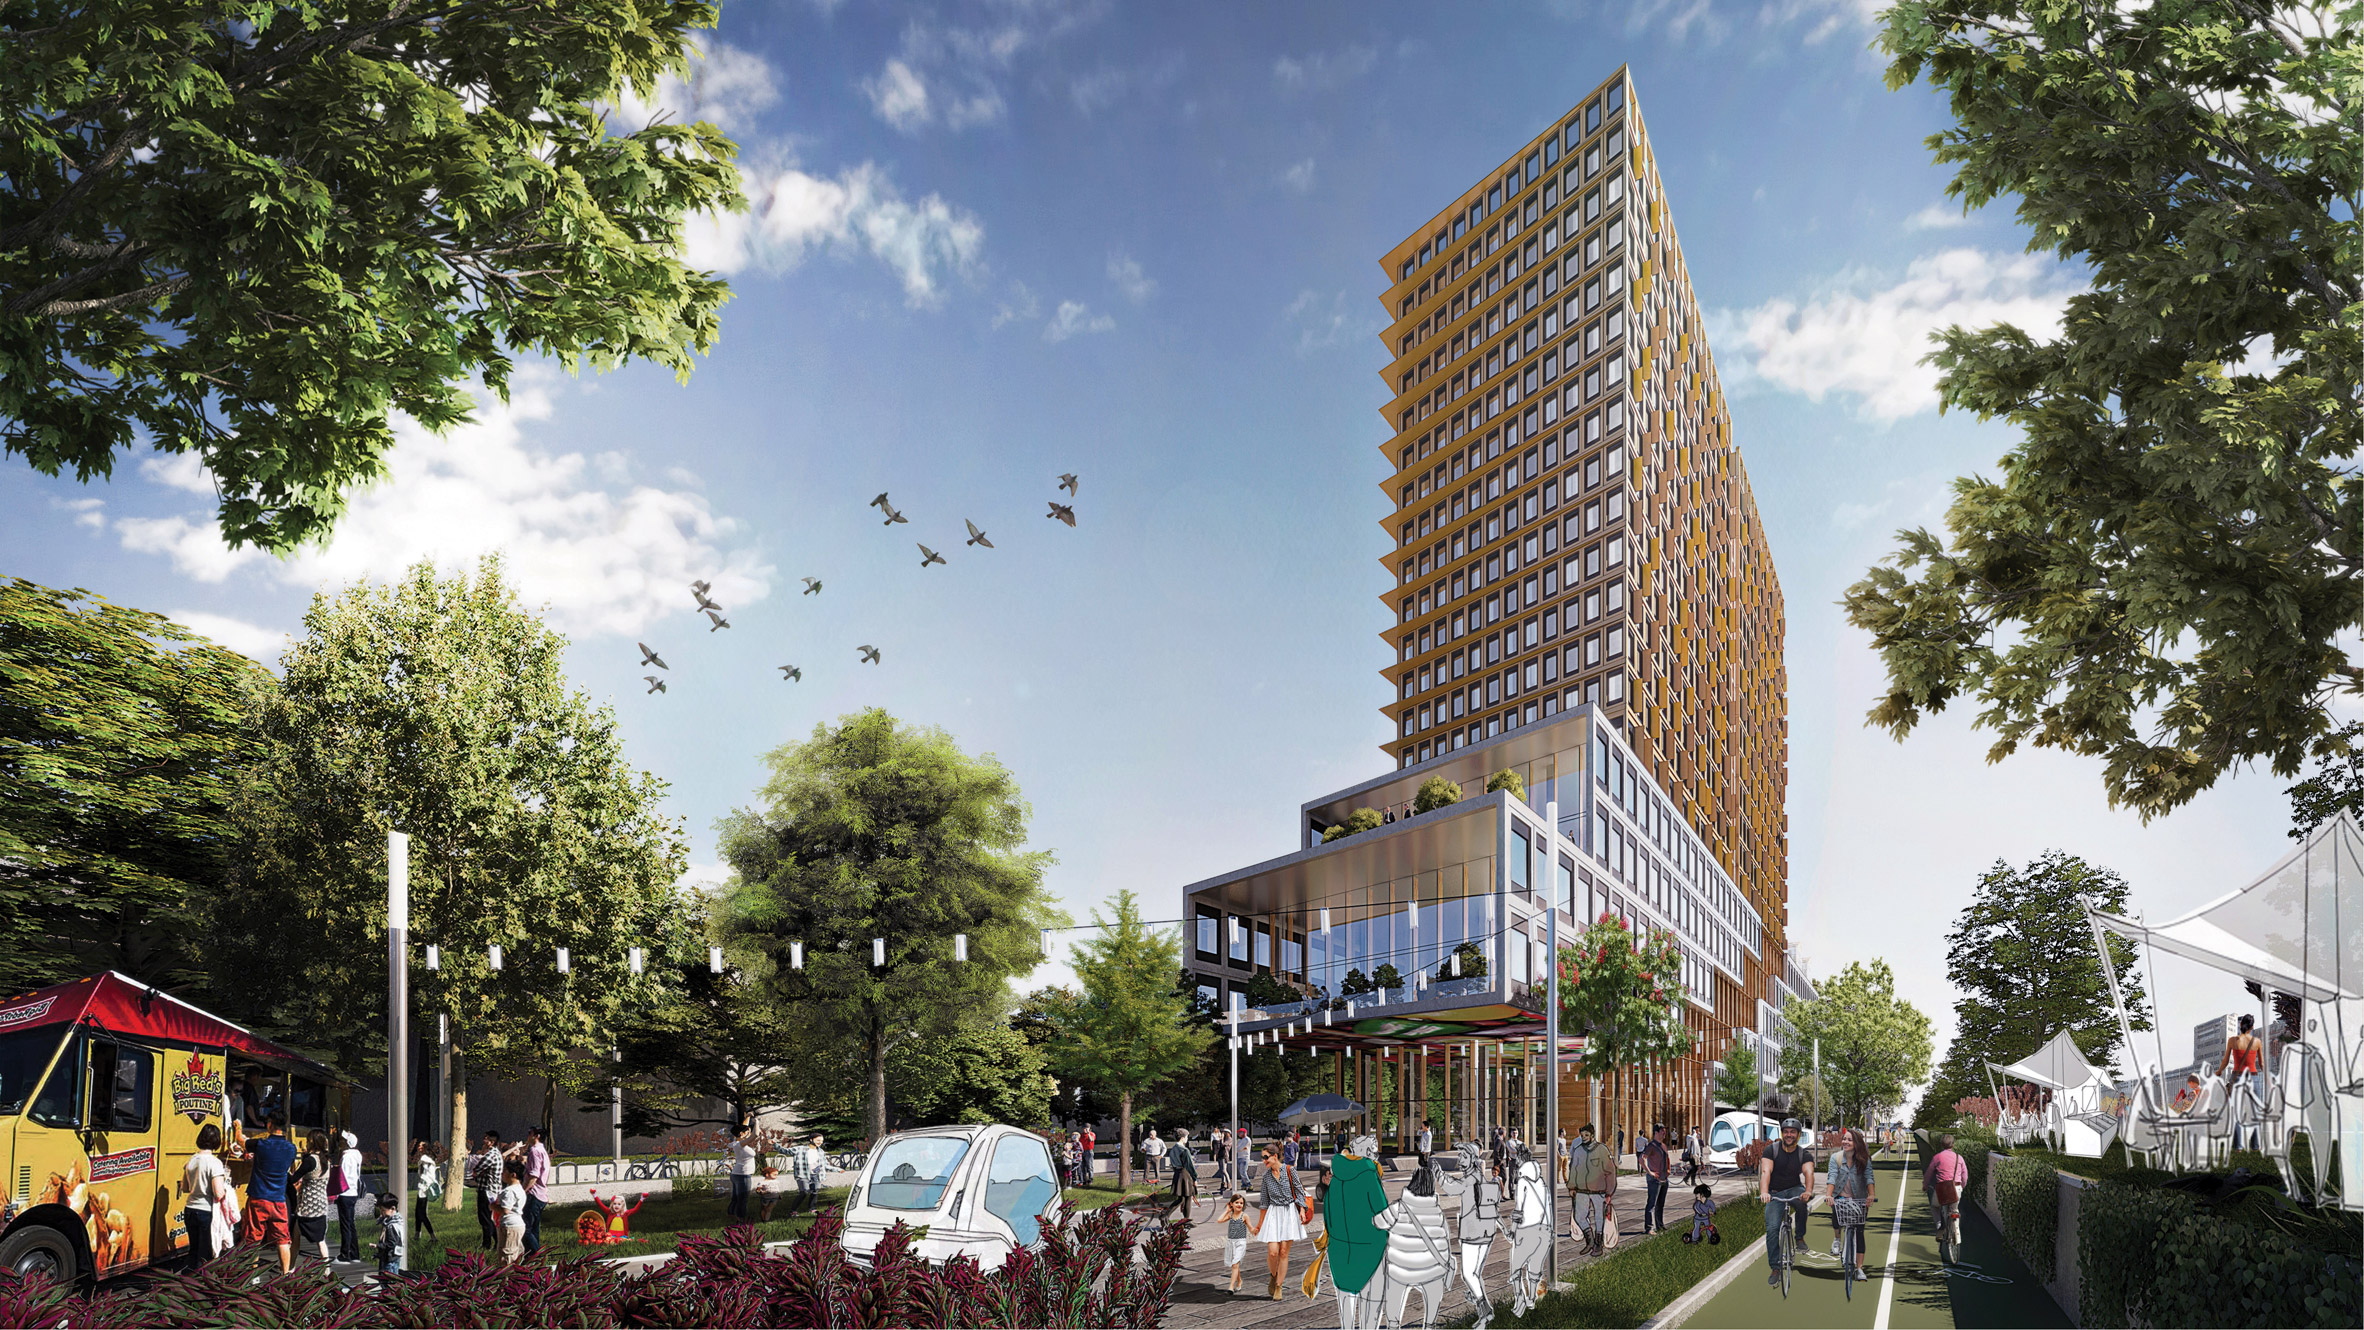 Montreal's winning entry for the Reinventing cities competition